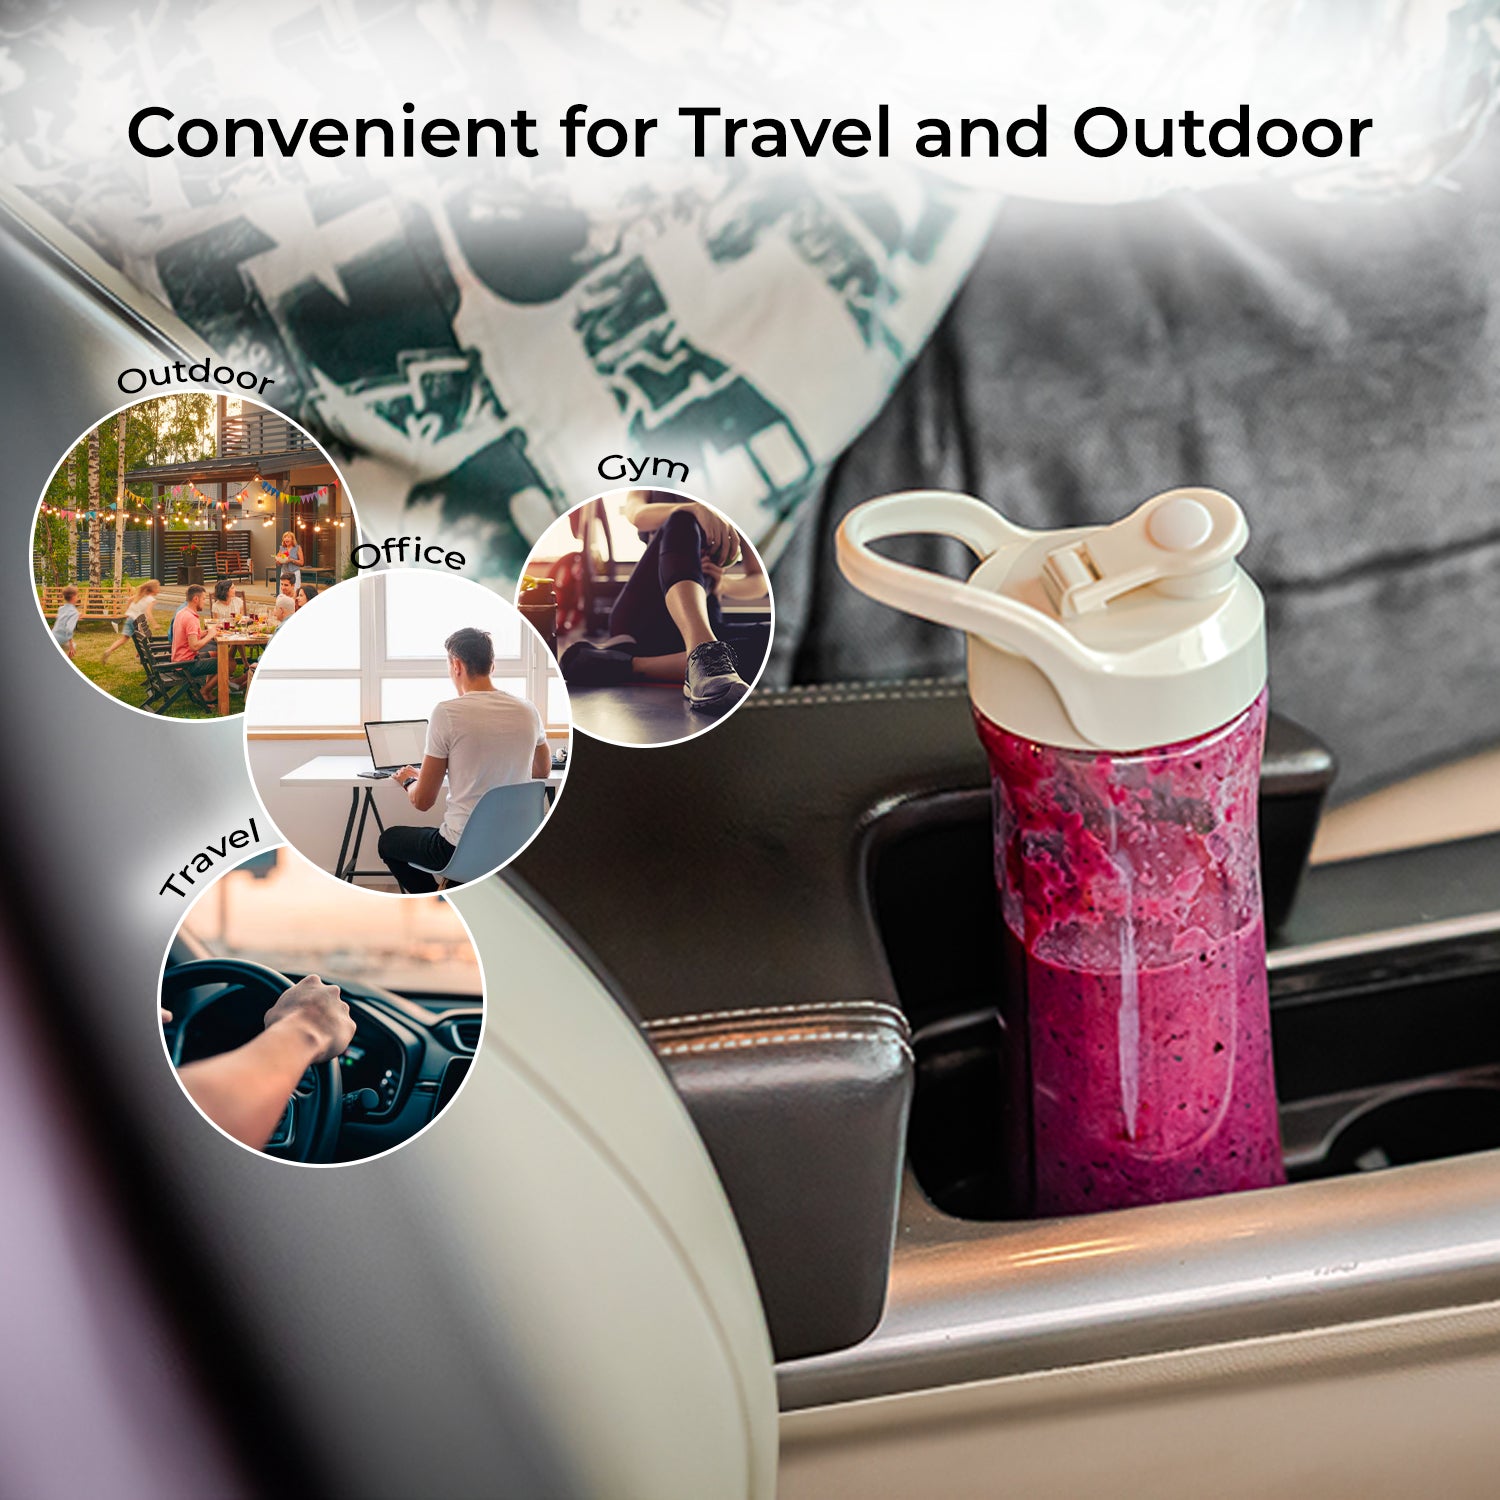 The image shows off an extra bottle for the travel blender in a car showing off it is portable and designed to be used on the go in the gym and more